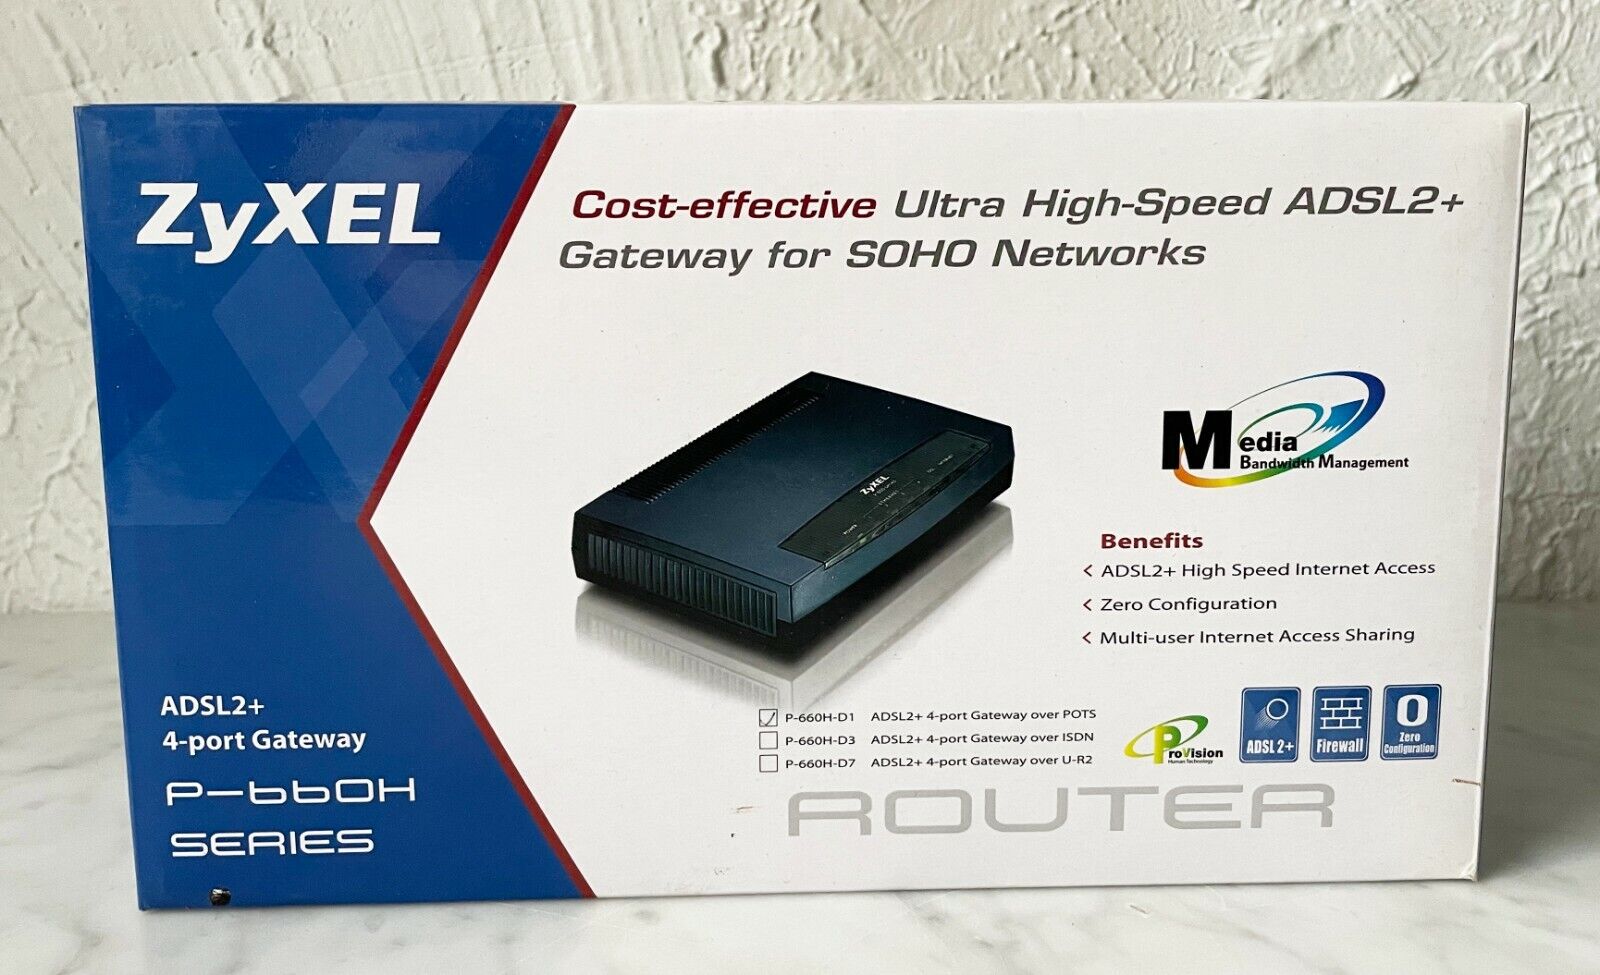 Zyxel Router P-660H-D1 Ultra High-Speed ADSL2+ 4-Port Gateway in Box